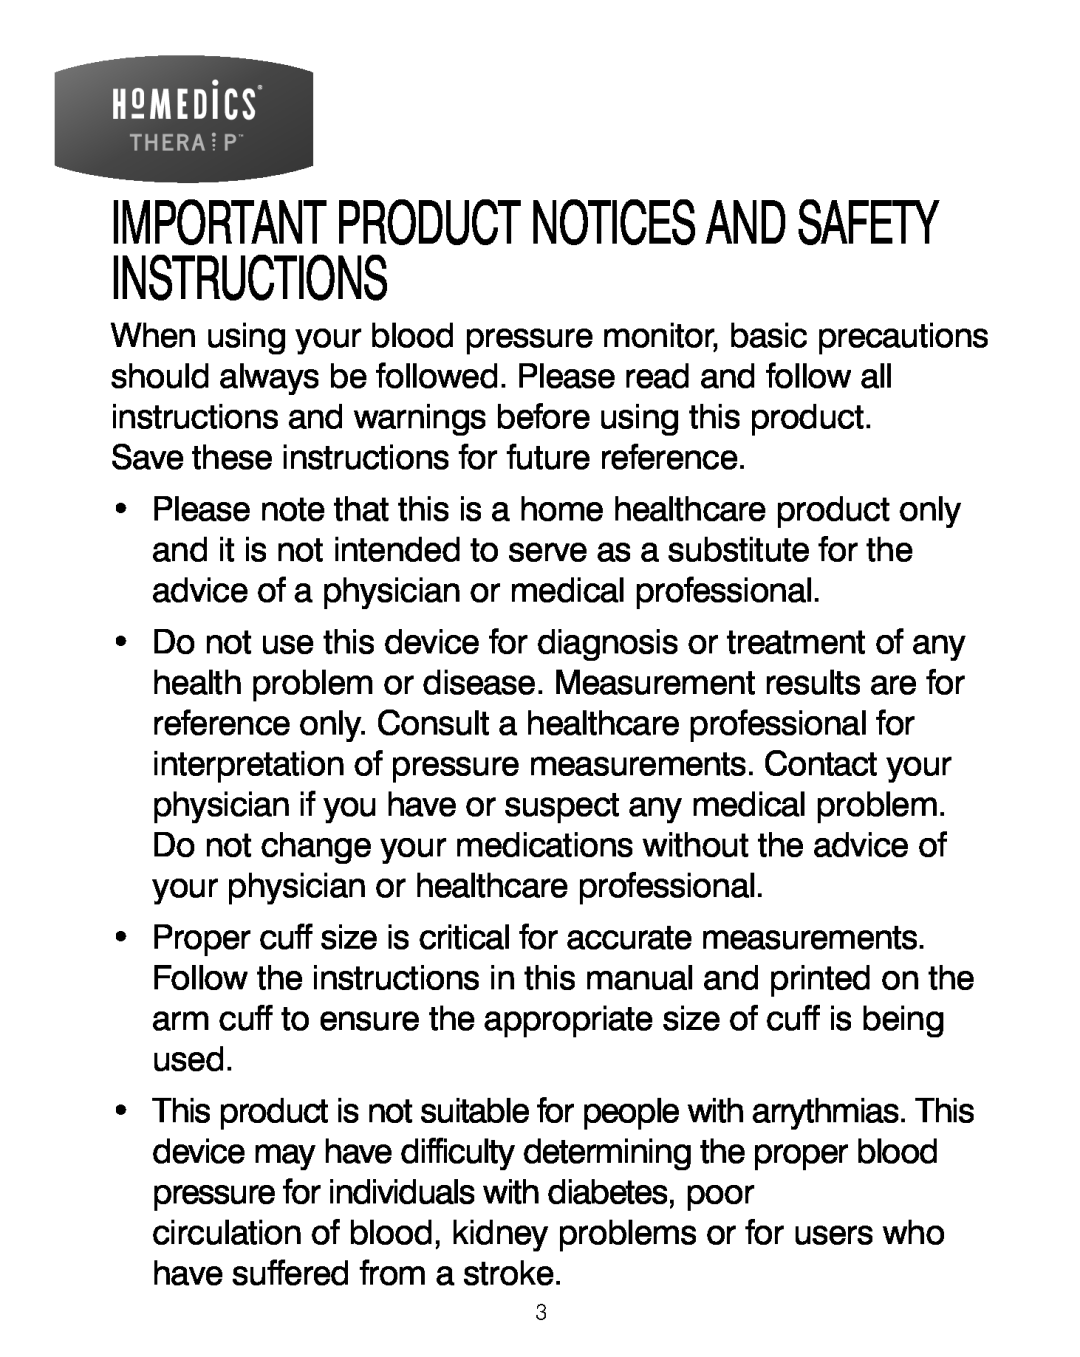 HoMedics BPA-200 manual Important Product Notices And Safety Instructions 